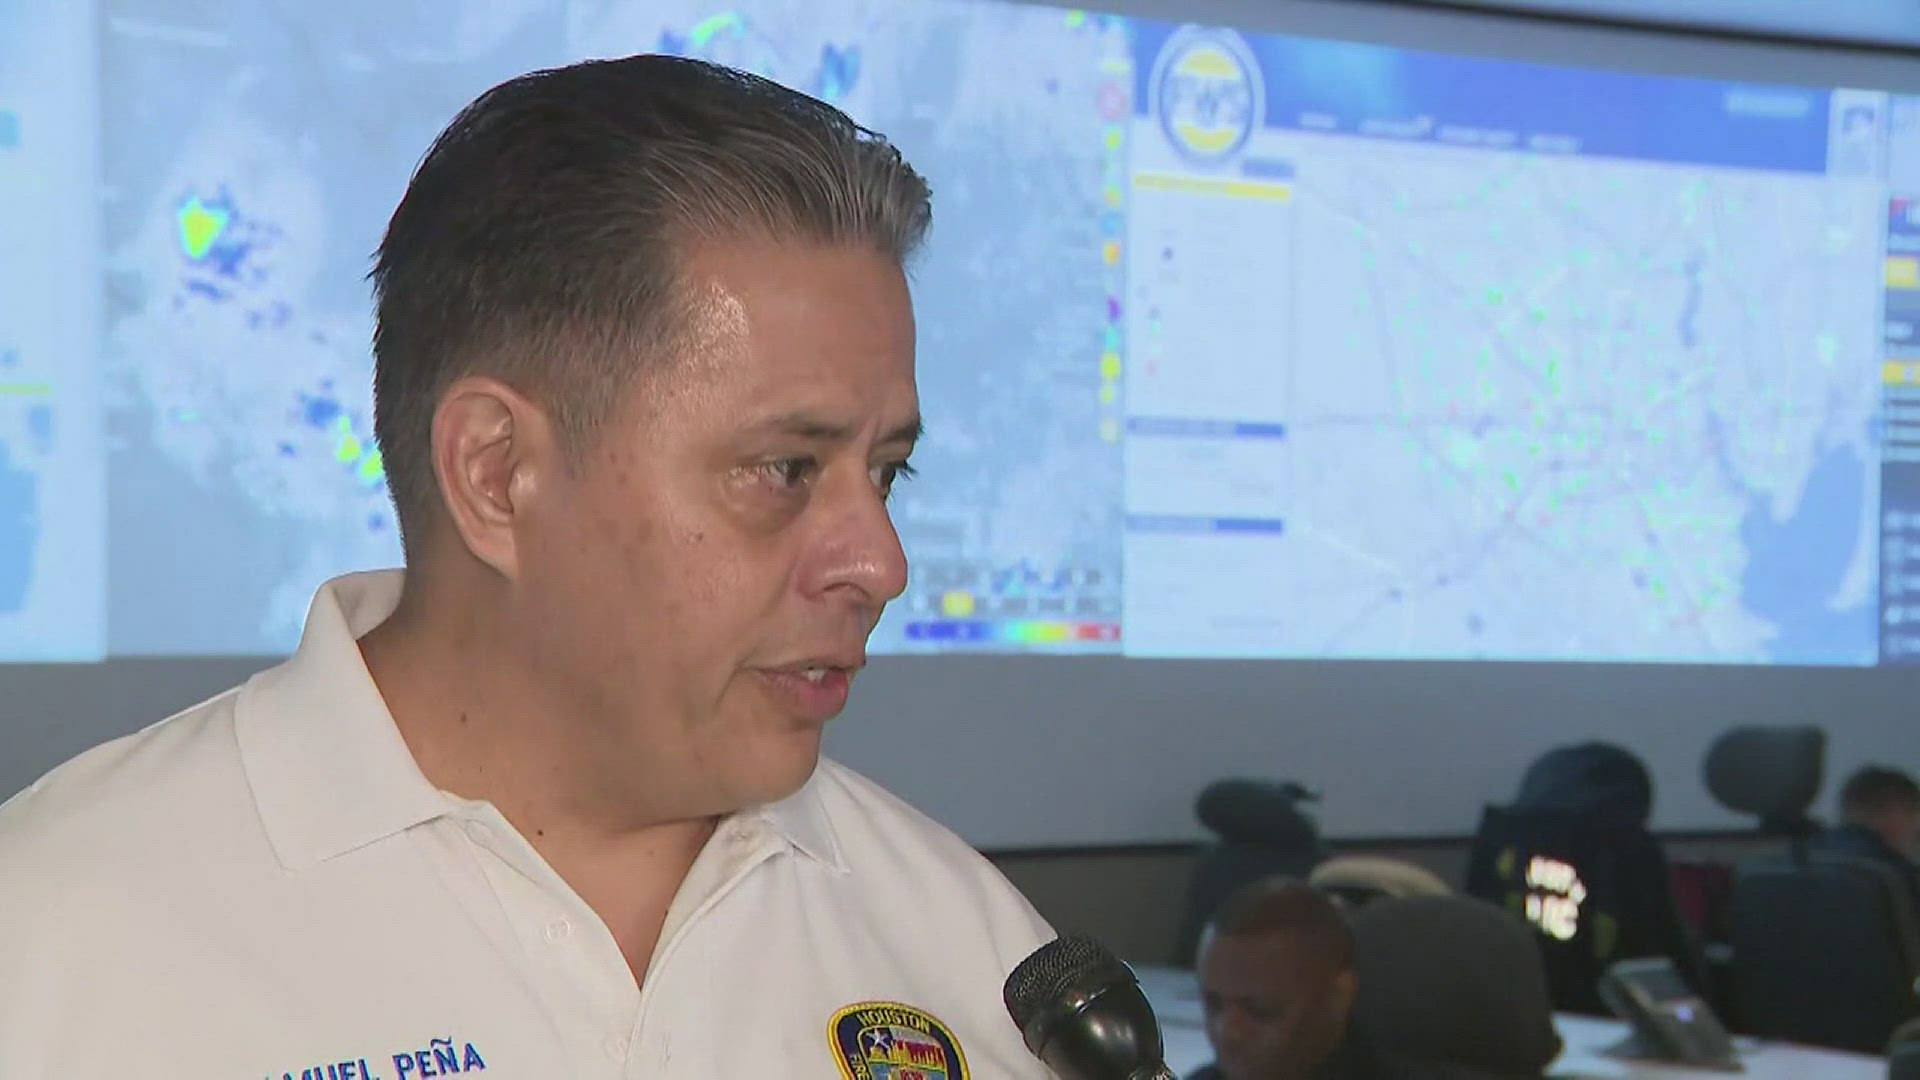 Houston FD Chief asking residents to stay off the streets as first responders are prioritizing life saving efforts.